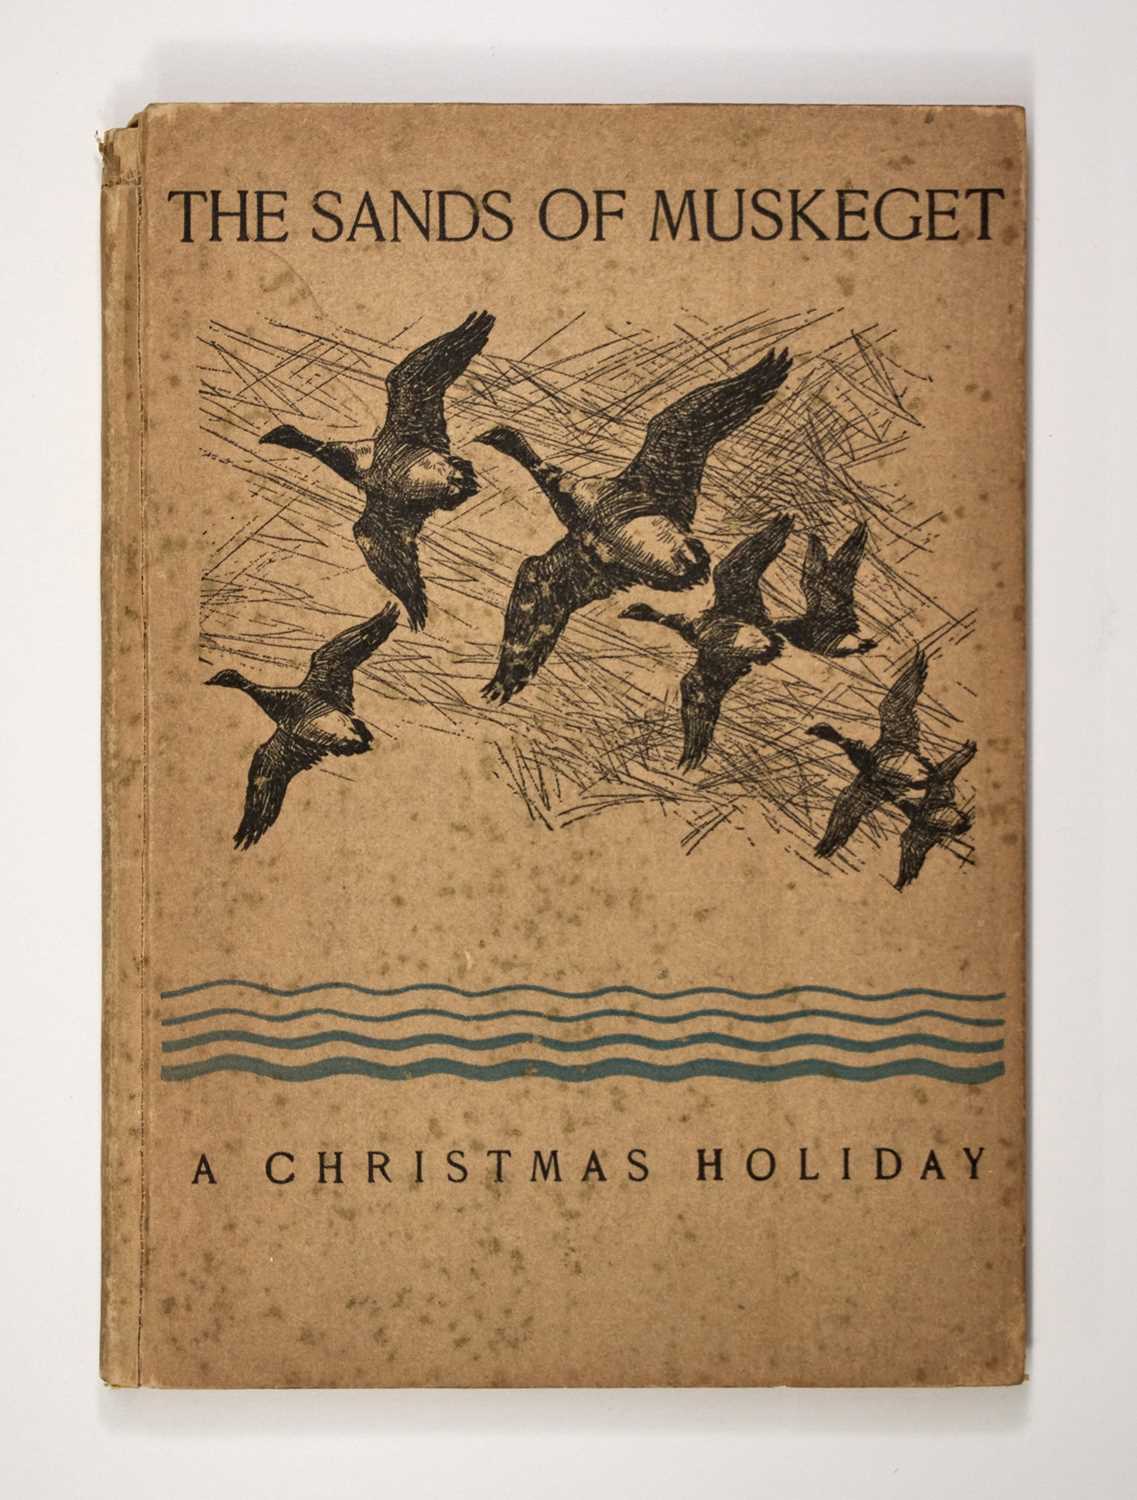 Lot 85 - [SPORTING]
[PHILLIPS, JOHN C.] The Sands of Muskeget. A Christmas Holiday.